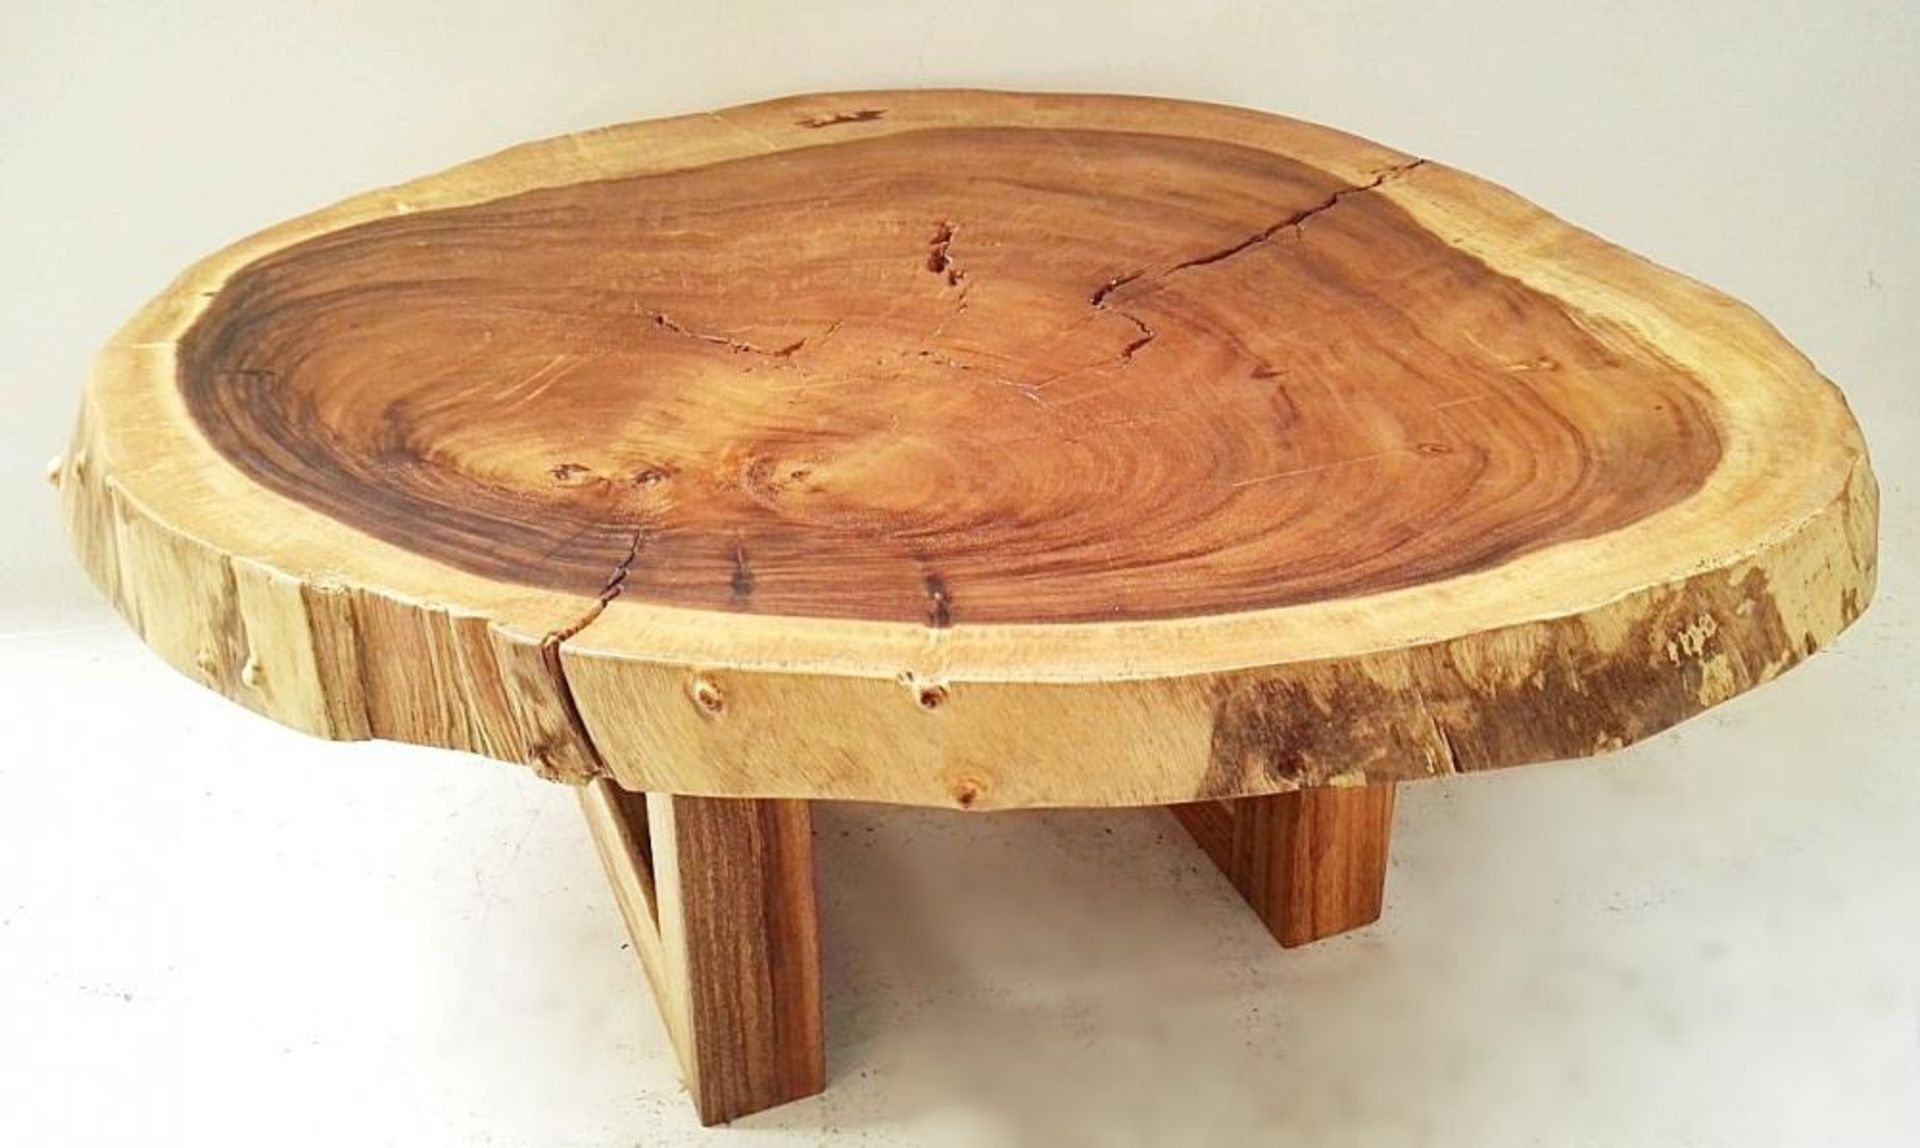 1 x Unique Reclaimed Solid Tree Trunk Coffee Table With Square Base - Dimensions (approx): Diameter